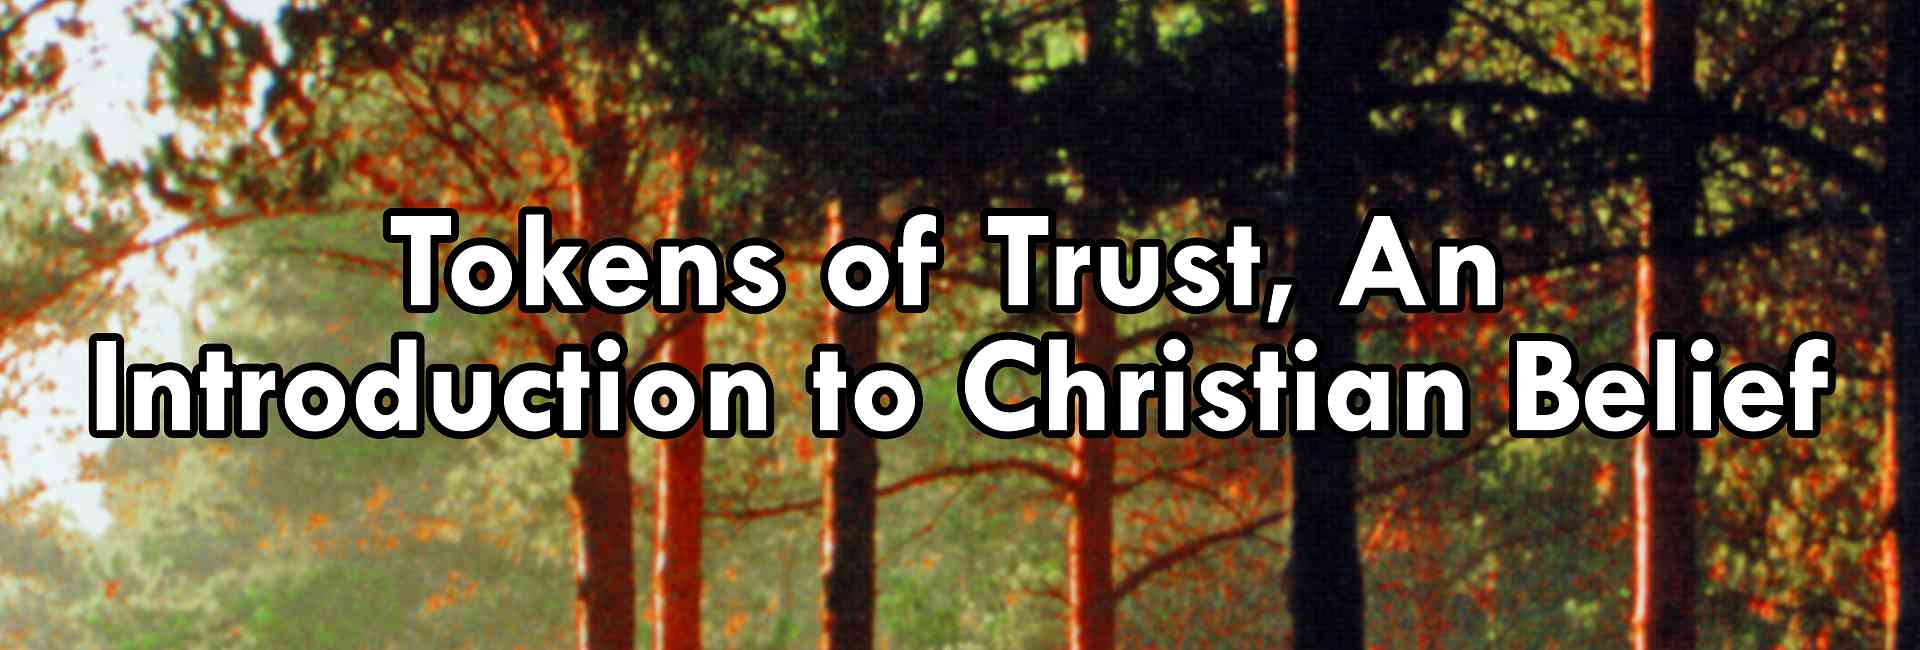 Tokens of Trust. An Introduction to Christian Belief